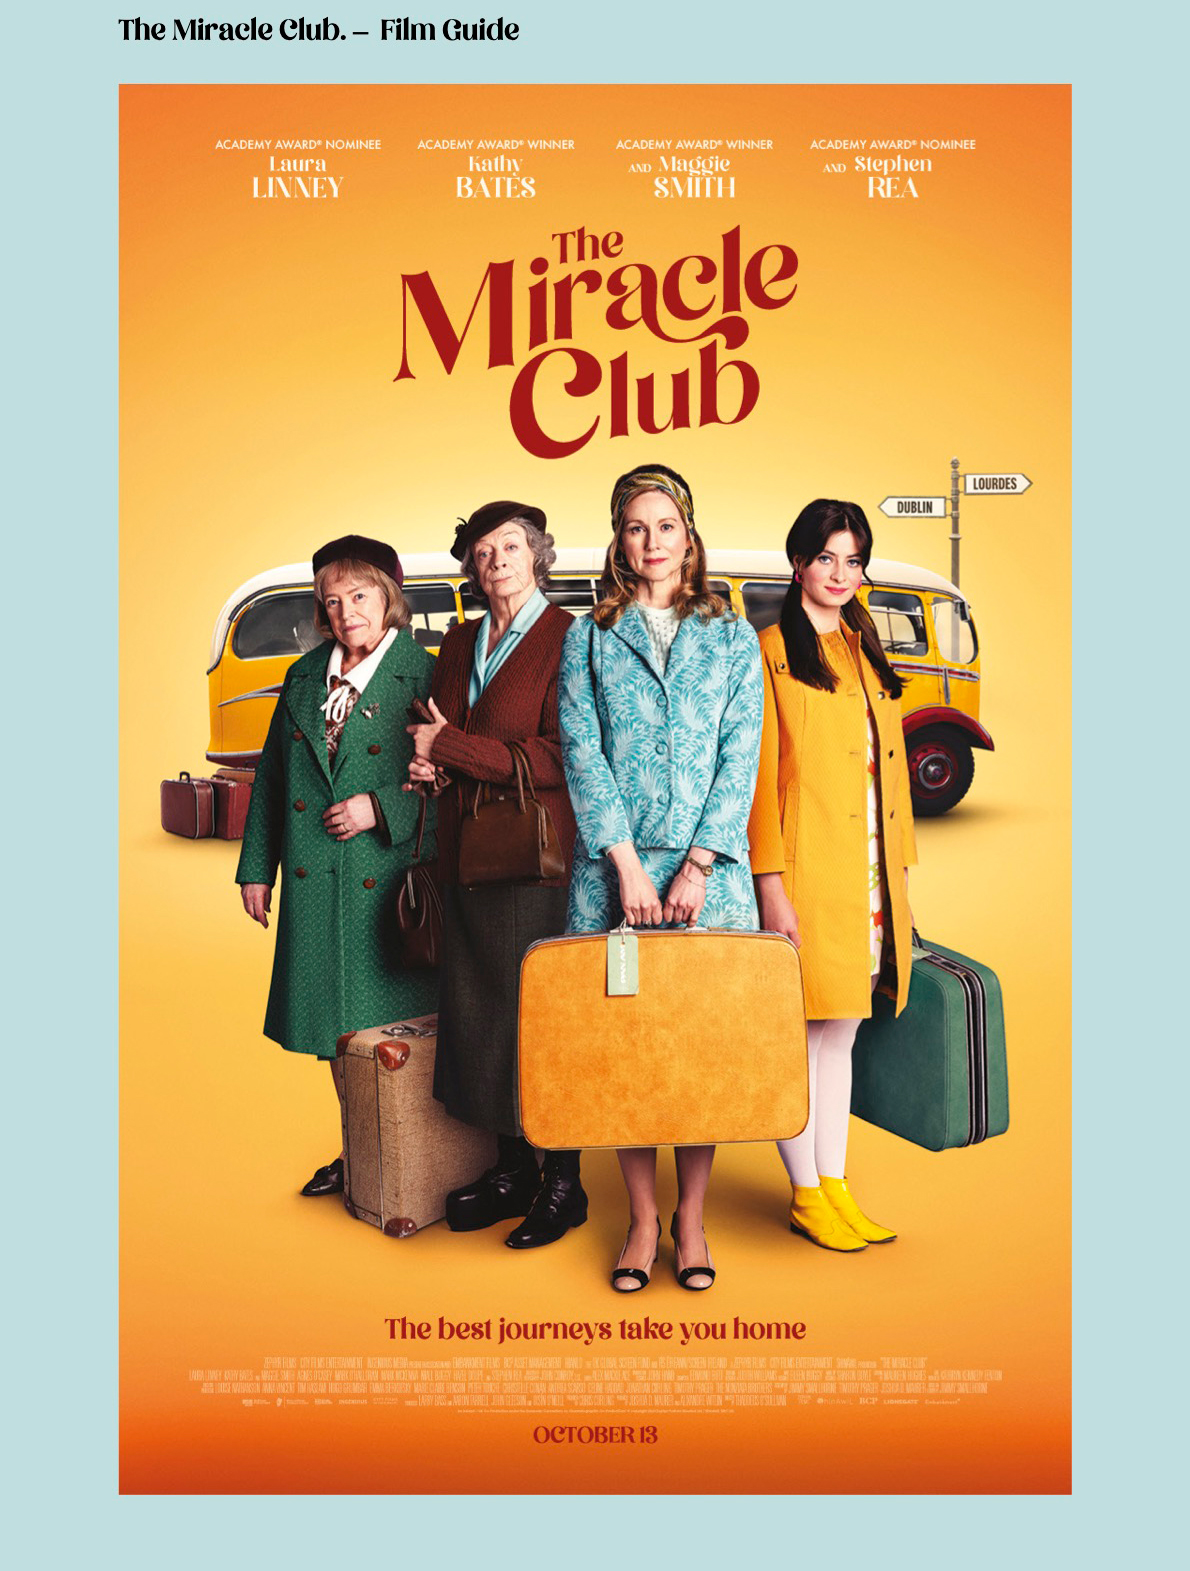 The Miracle Club